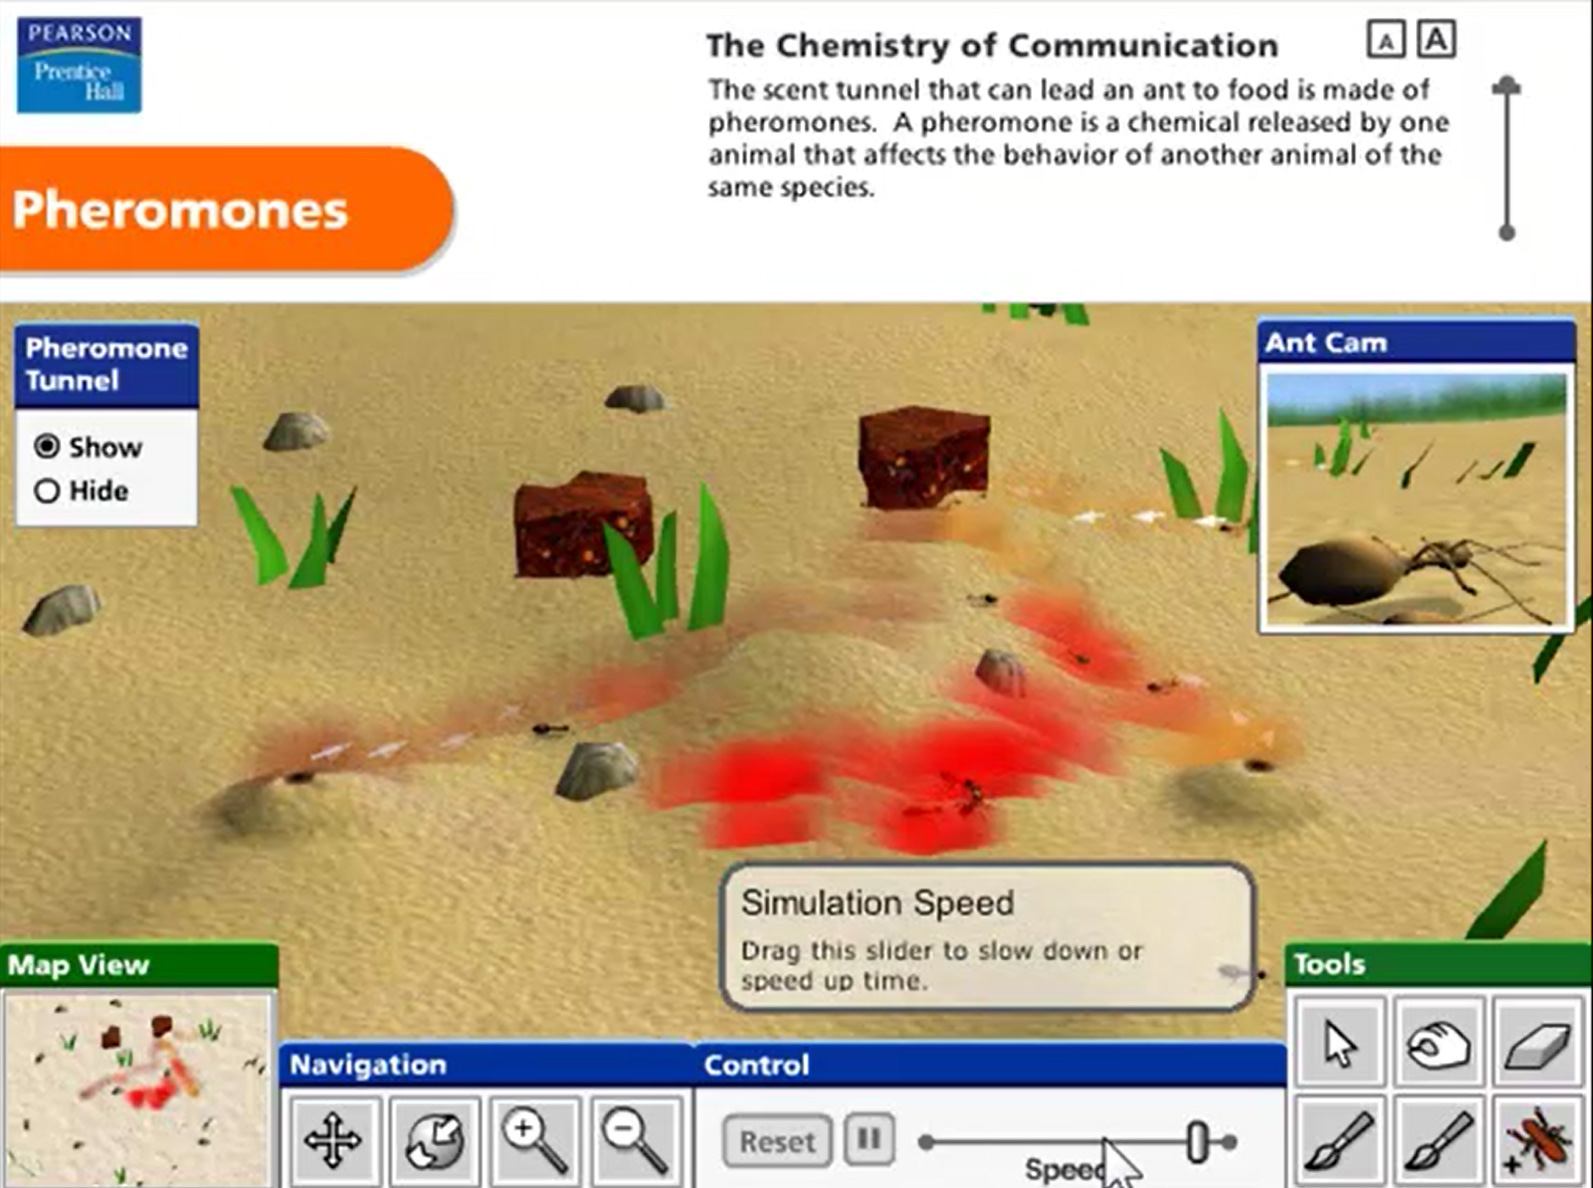 Pearson Education Virtual Science Experiments by ForgeFX Simulations, Pheromones